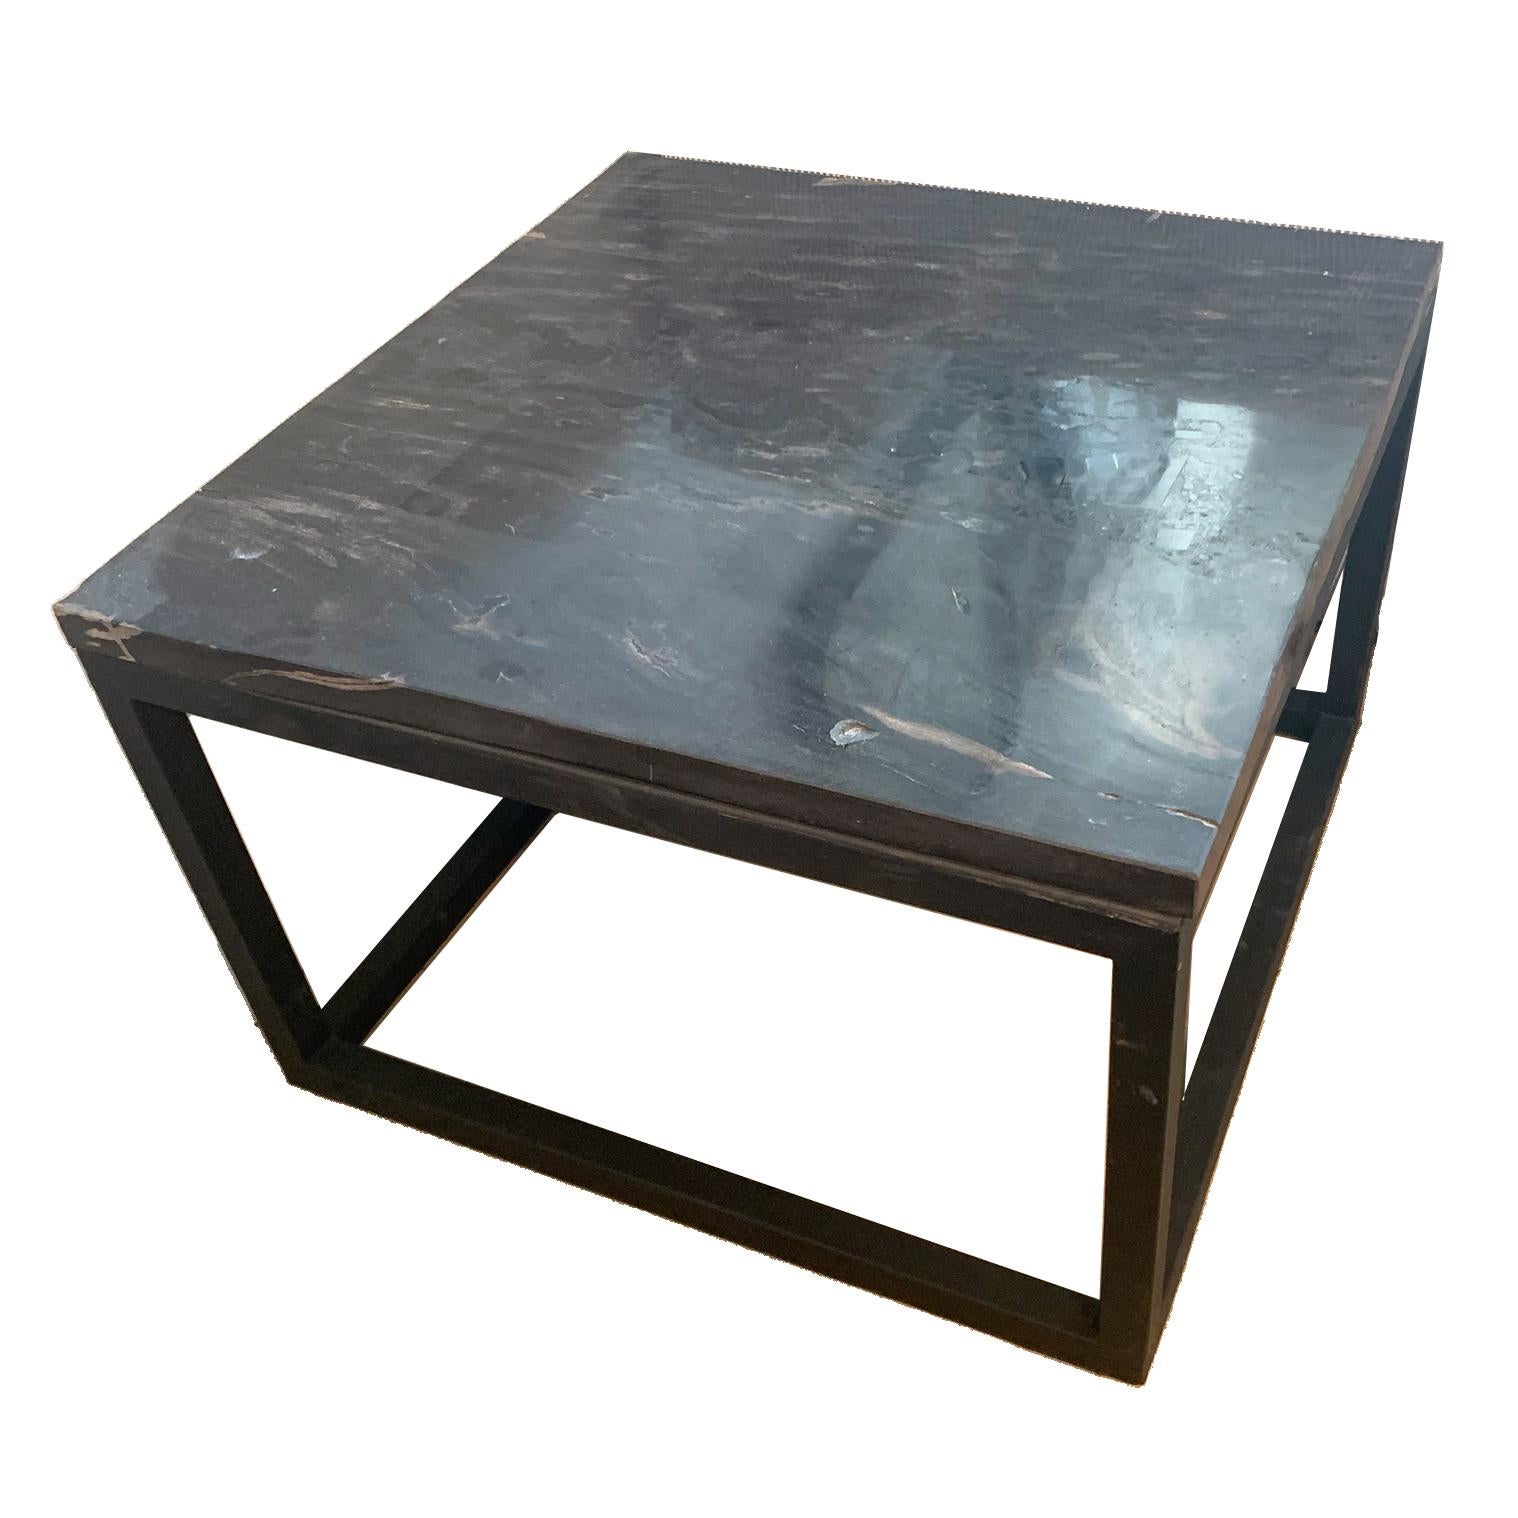 A polished petrified wood side table with a unique and natural design. The custom slice was cut to create a square slab where the the unique qualities of the wood are visible from all sides.